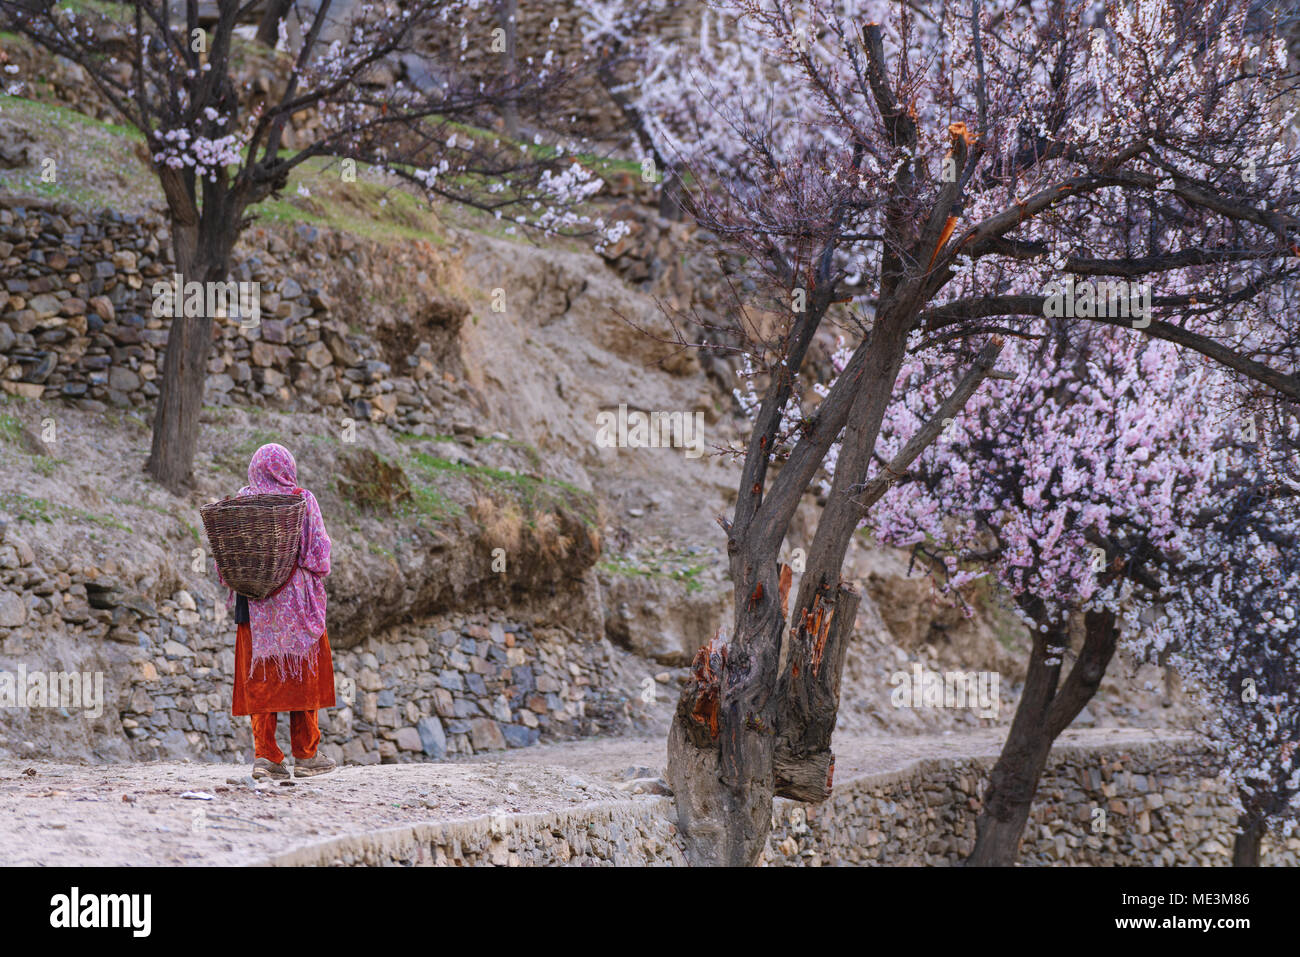 Woman in rural village in Pakistan walking on country road in spring season with field of blossoming trees Stock Photo